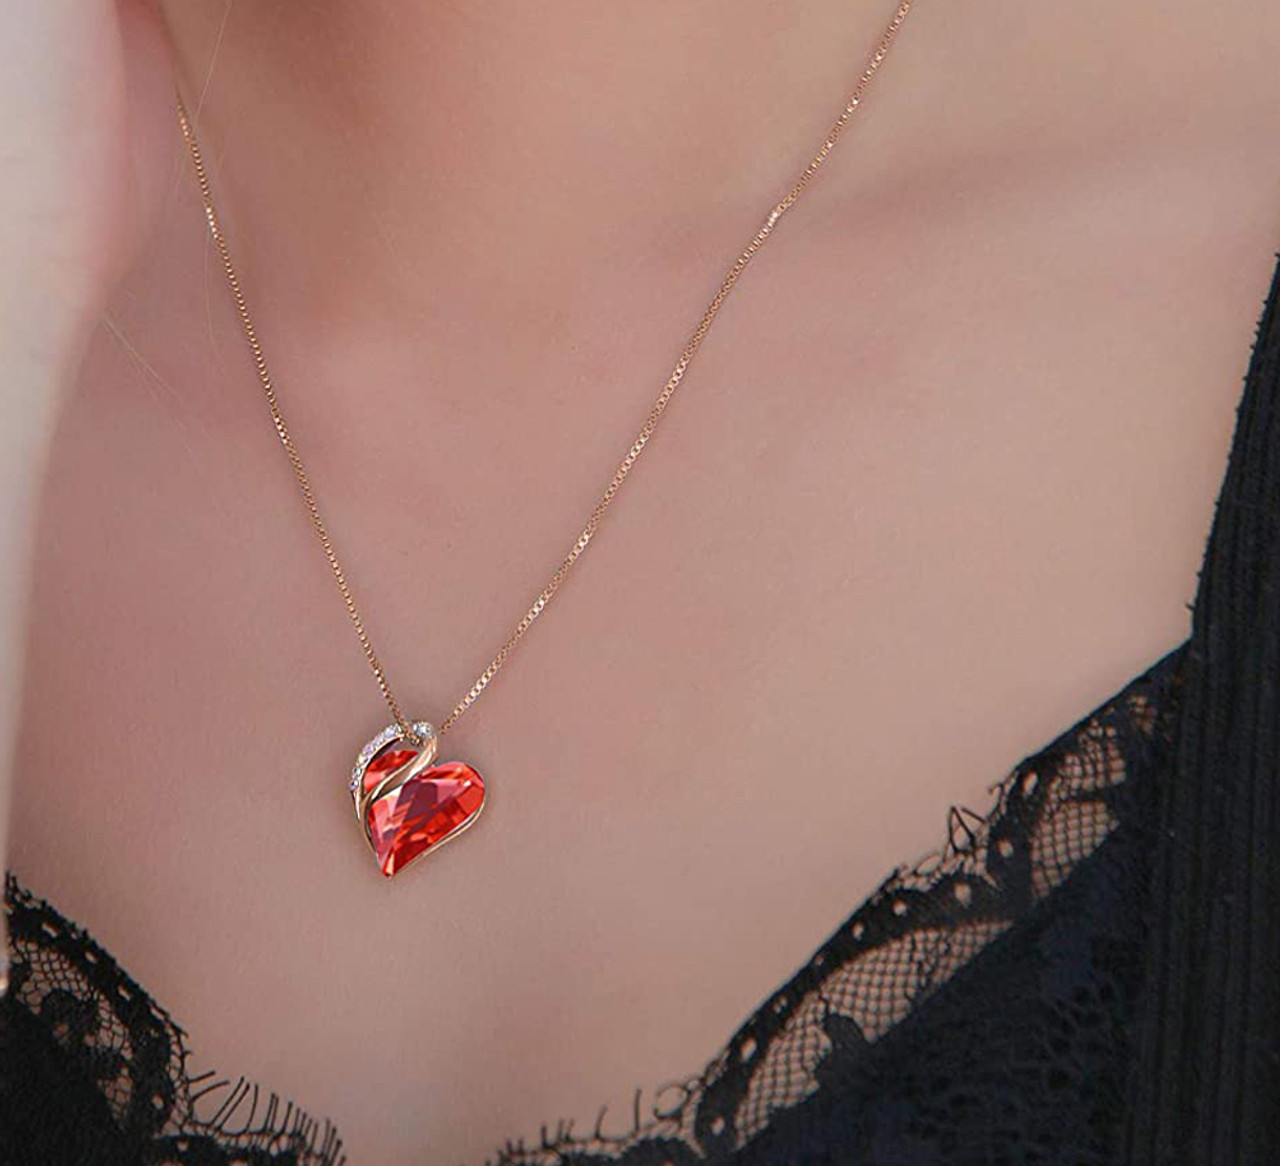 July and January Birthstone - Red Carnelian Looped Heart Design Crystal - Rose Gold Pendant and CZ stones - Courage Stone with 18" Chain Necklace. Gift for Lover, Girl Friend, Wife, Valentine's Day Gift, Mother's Day, Anniversary Gift Heart Necklace.